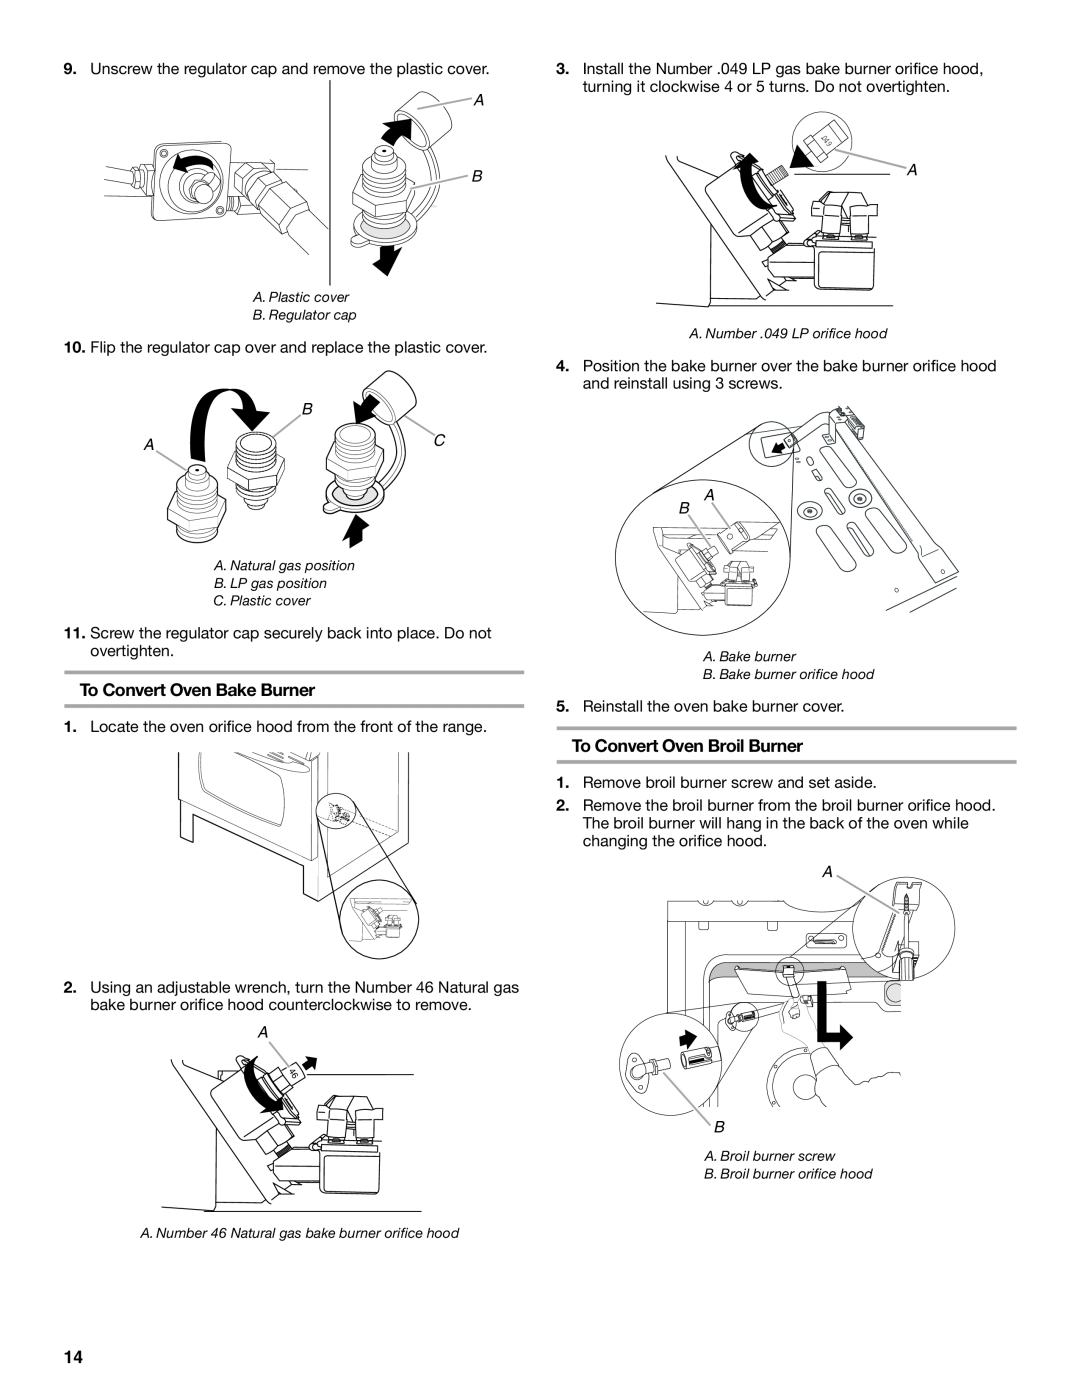 Maytag W10258096A installation instructions To Convert Oven Bake Burner, To Convert Oven Broil Burner, B A C 